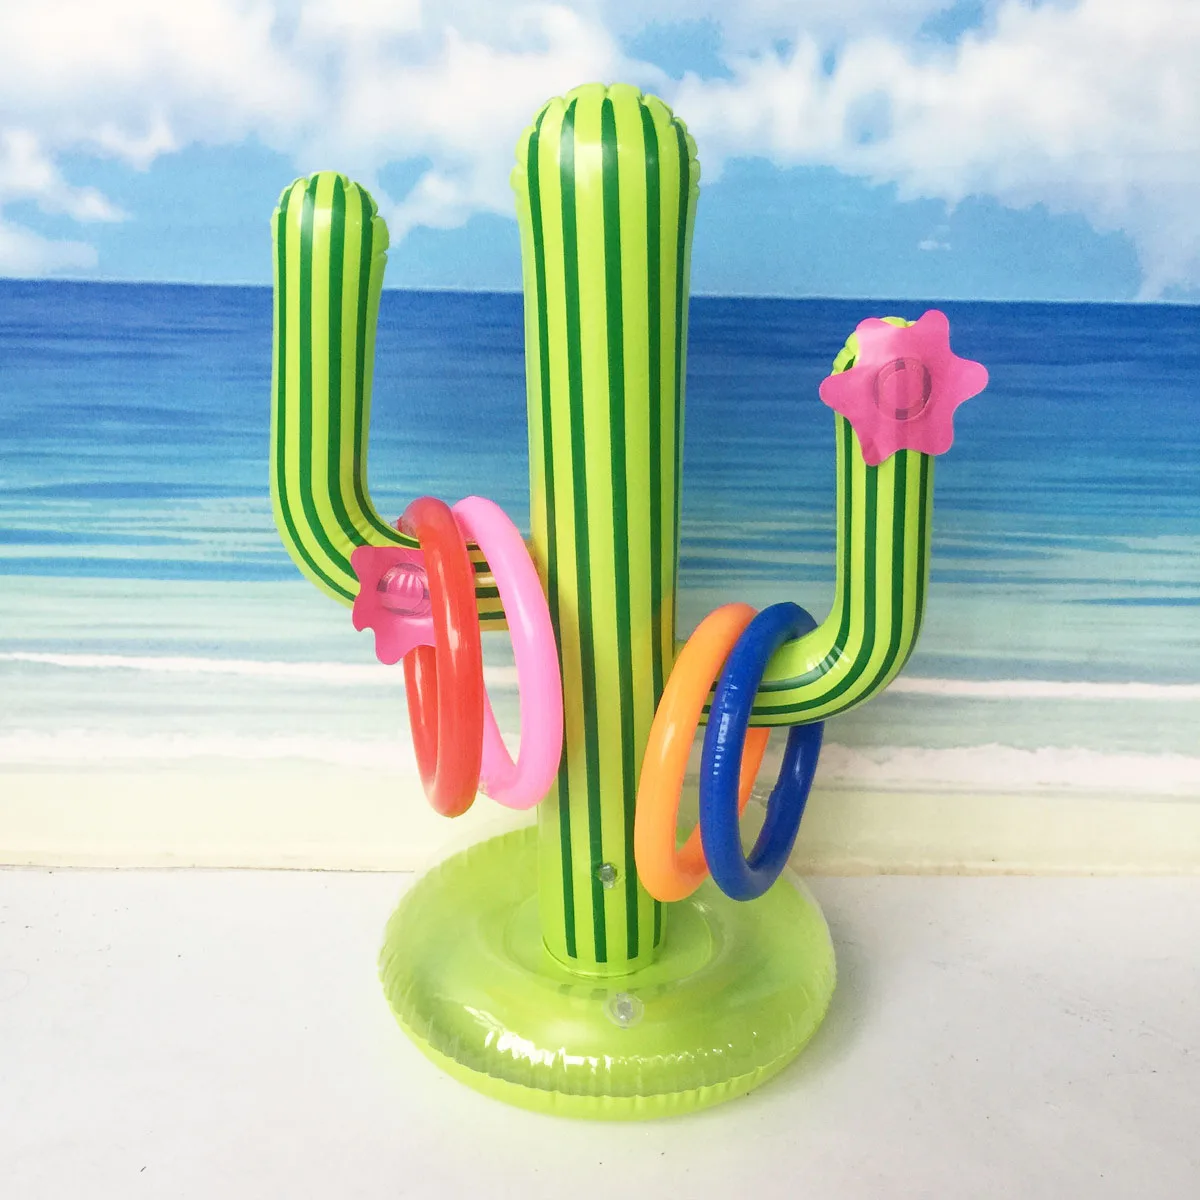 Cactus Swimming Pool Ring Toss Games Inflatable Pool Toys With 4 Ring Summer - £9.71 GBP